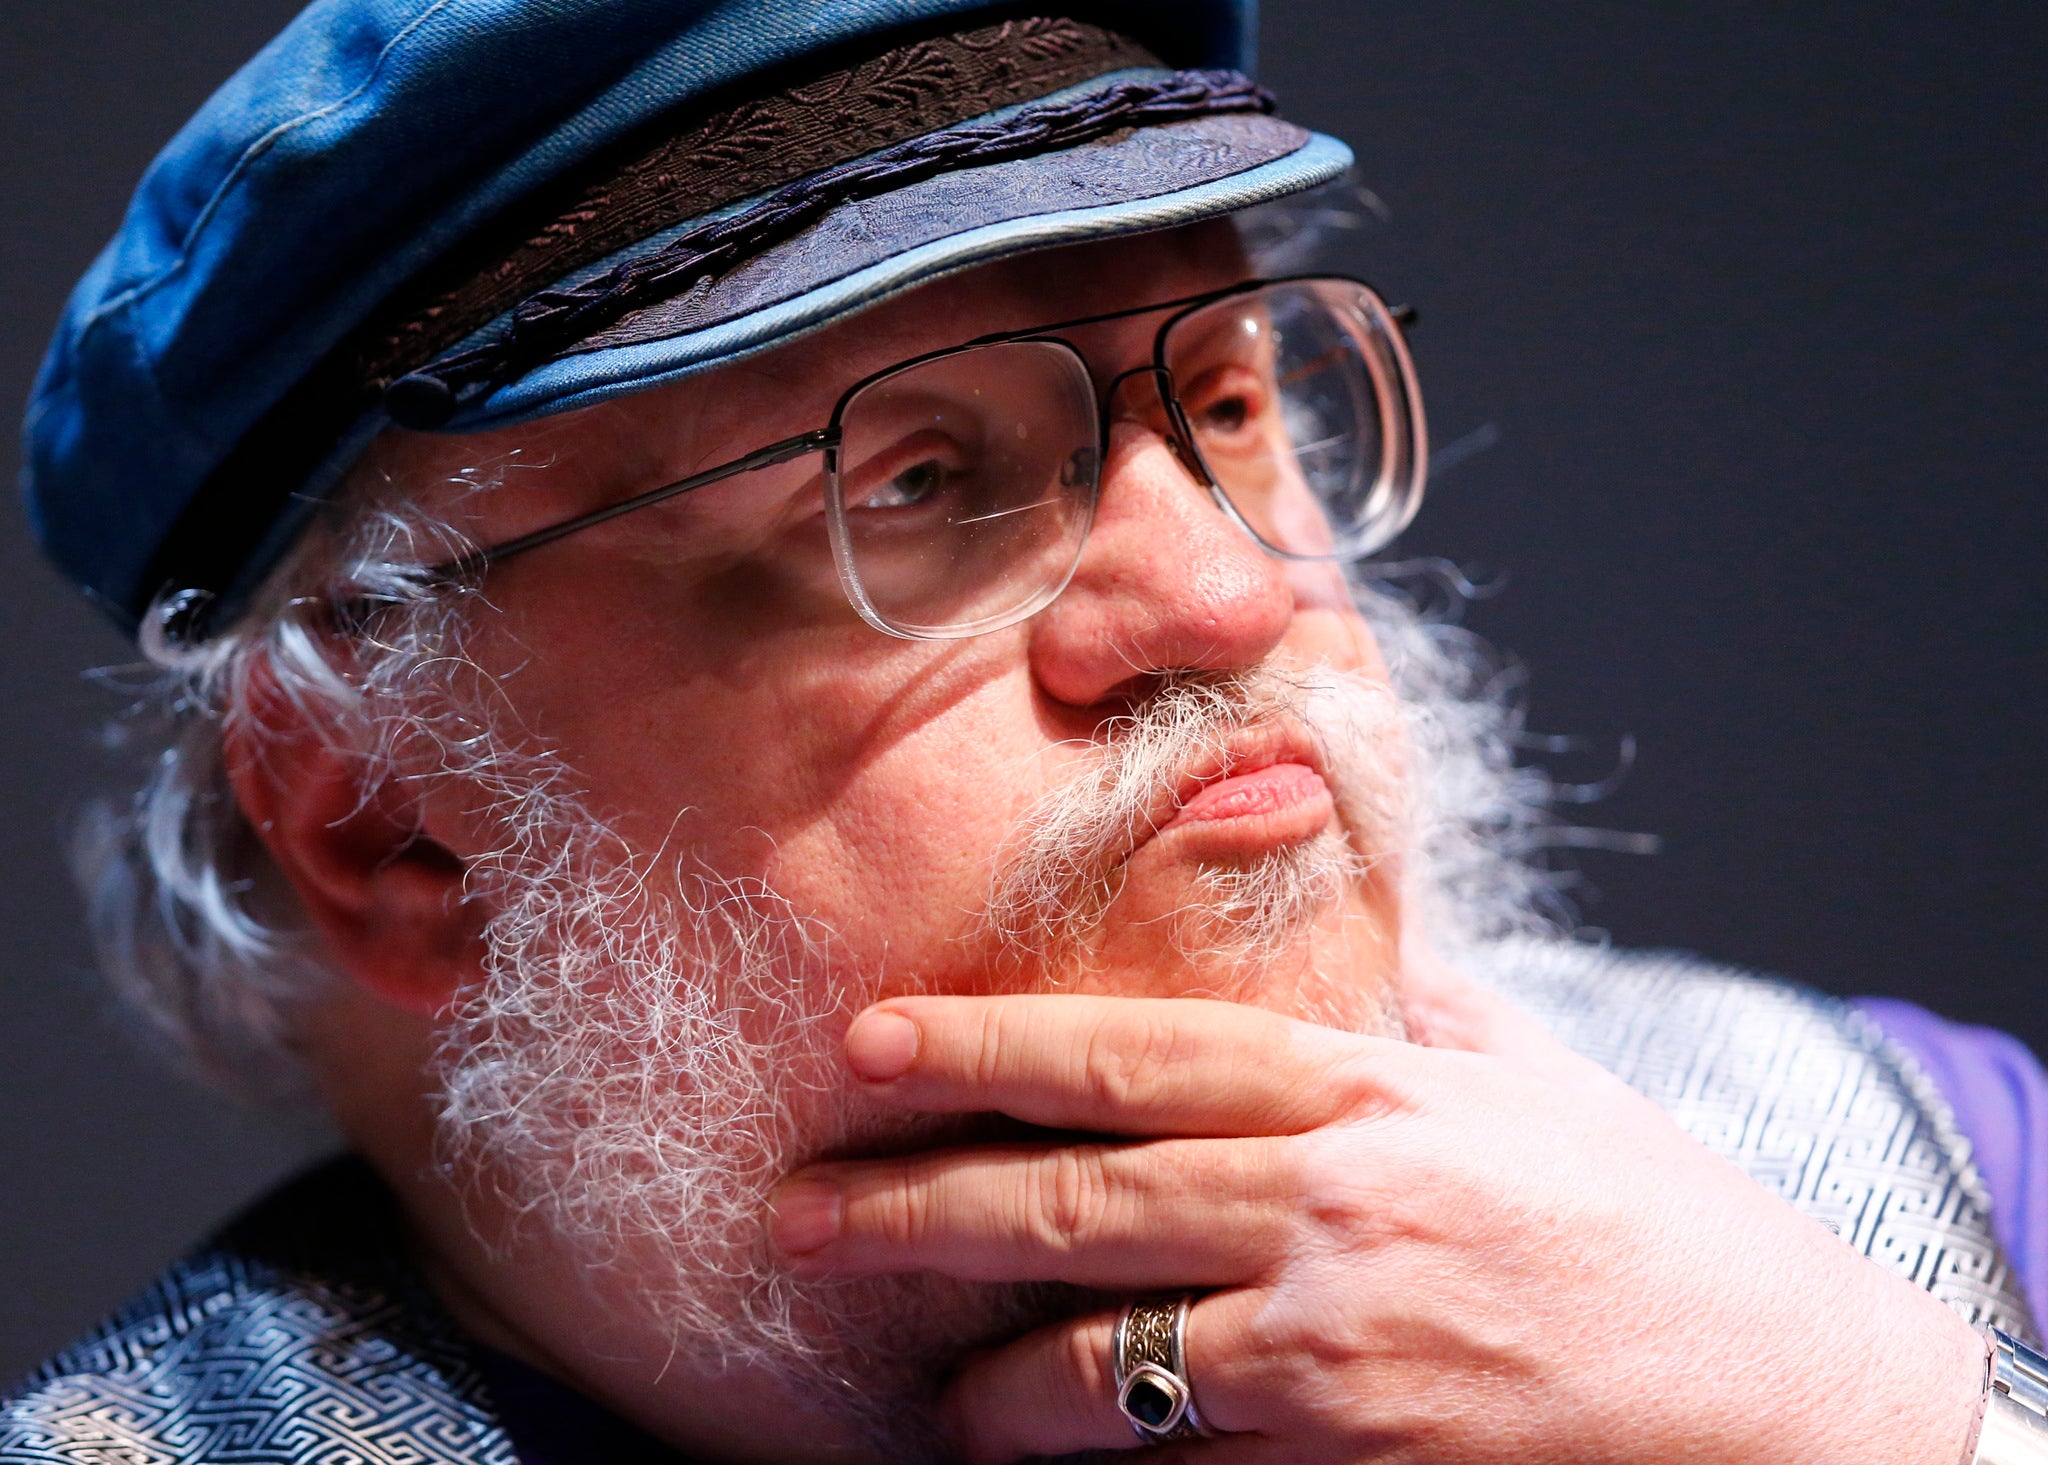 Game of Thrones author George R R Martin said the decision was an act of 'corporate cowardice'